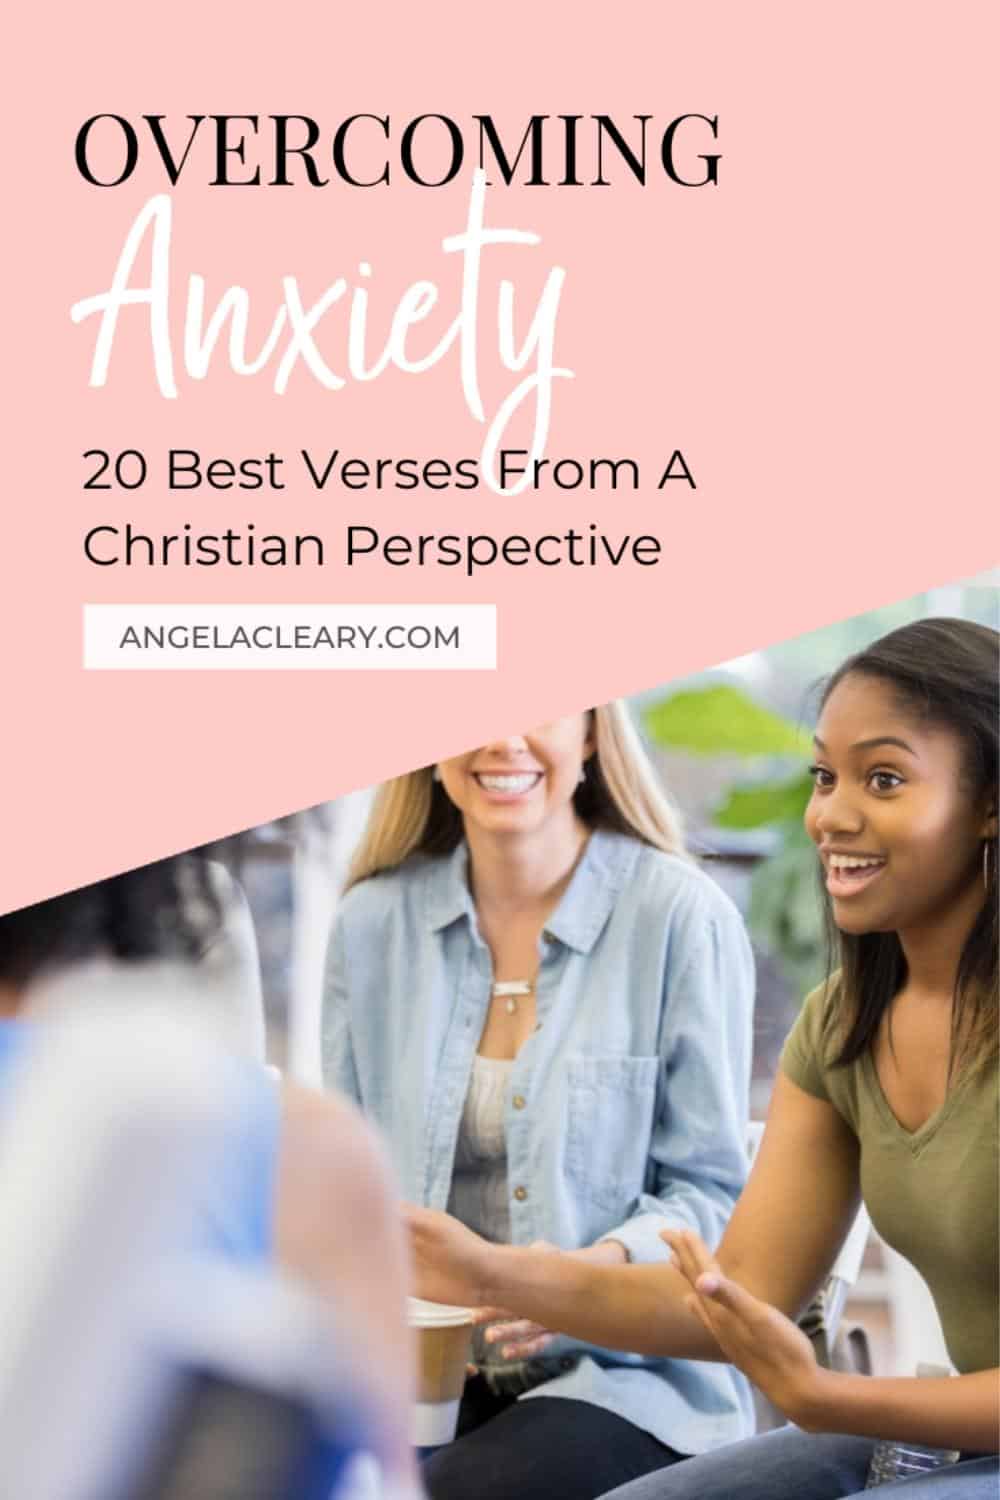 Overcoming Anxiety: 20 Best Verses From A Christian Perspective